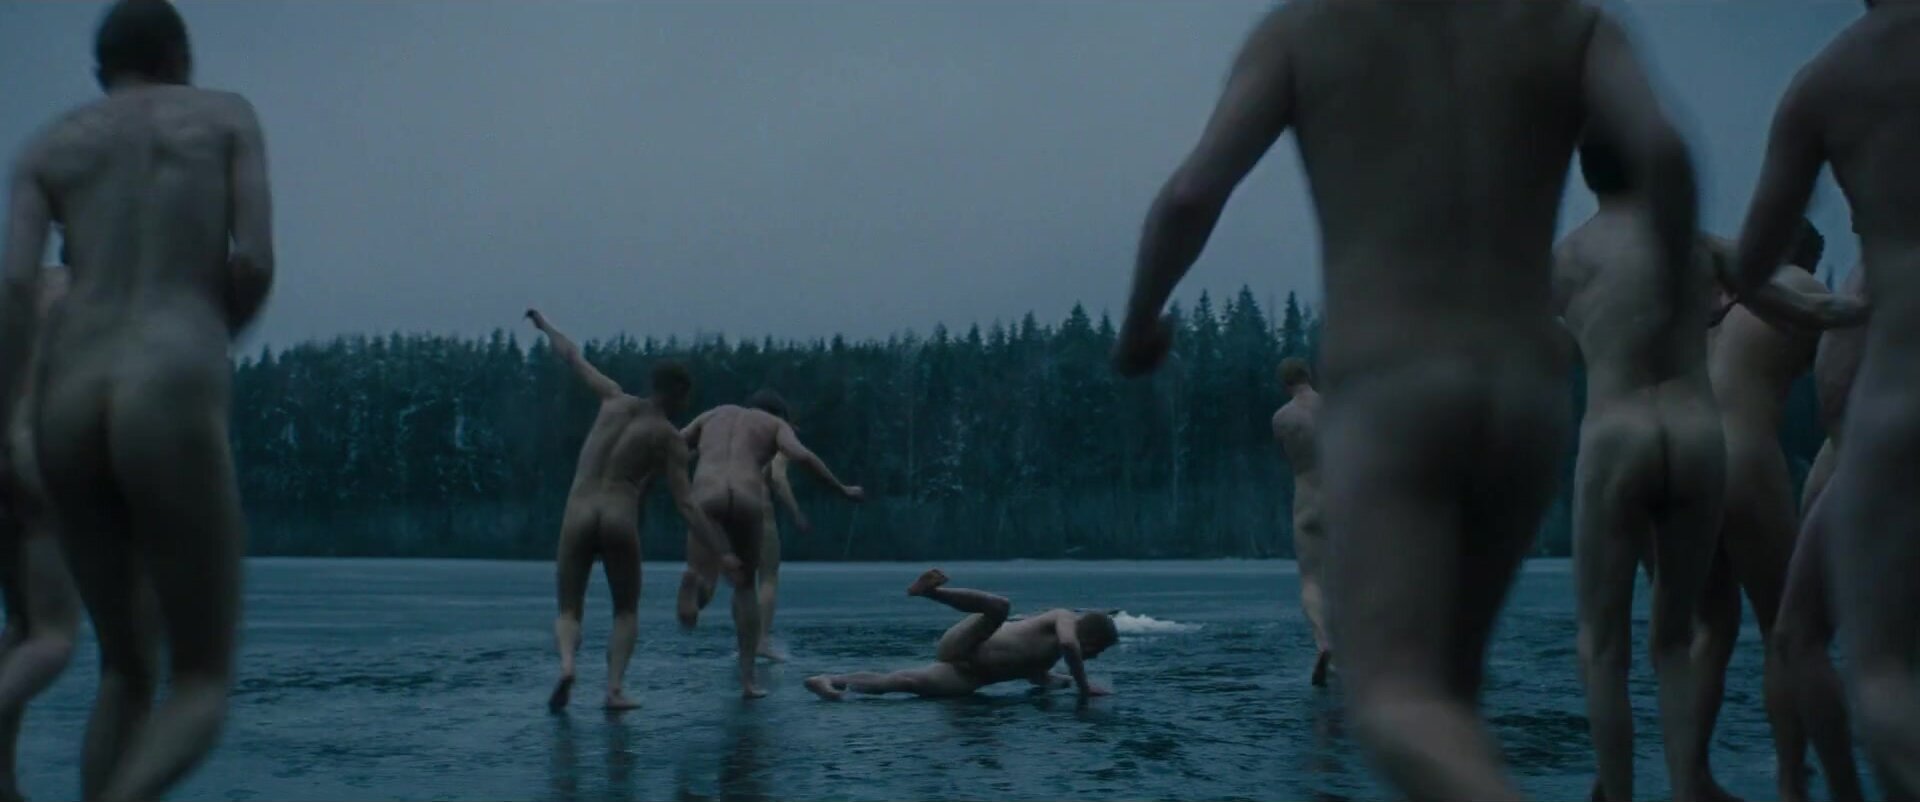 Naked men in movie T0m 0f Finl@nd